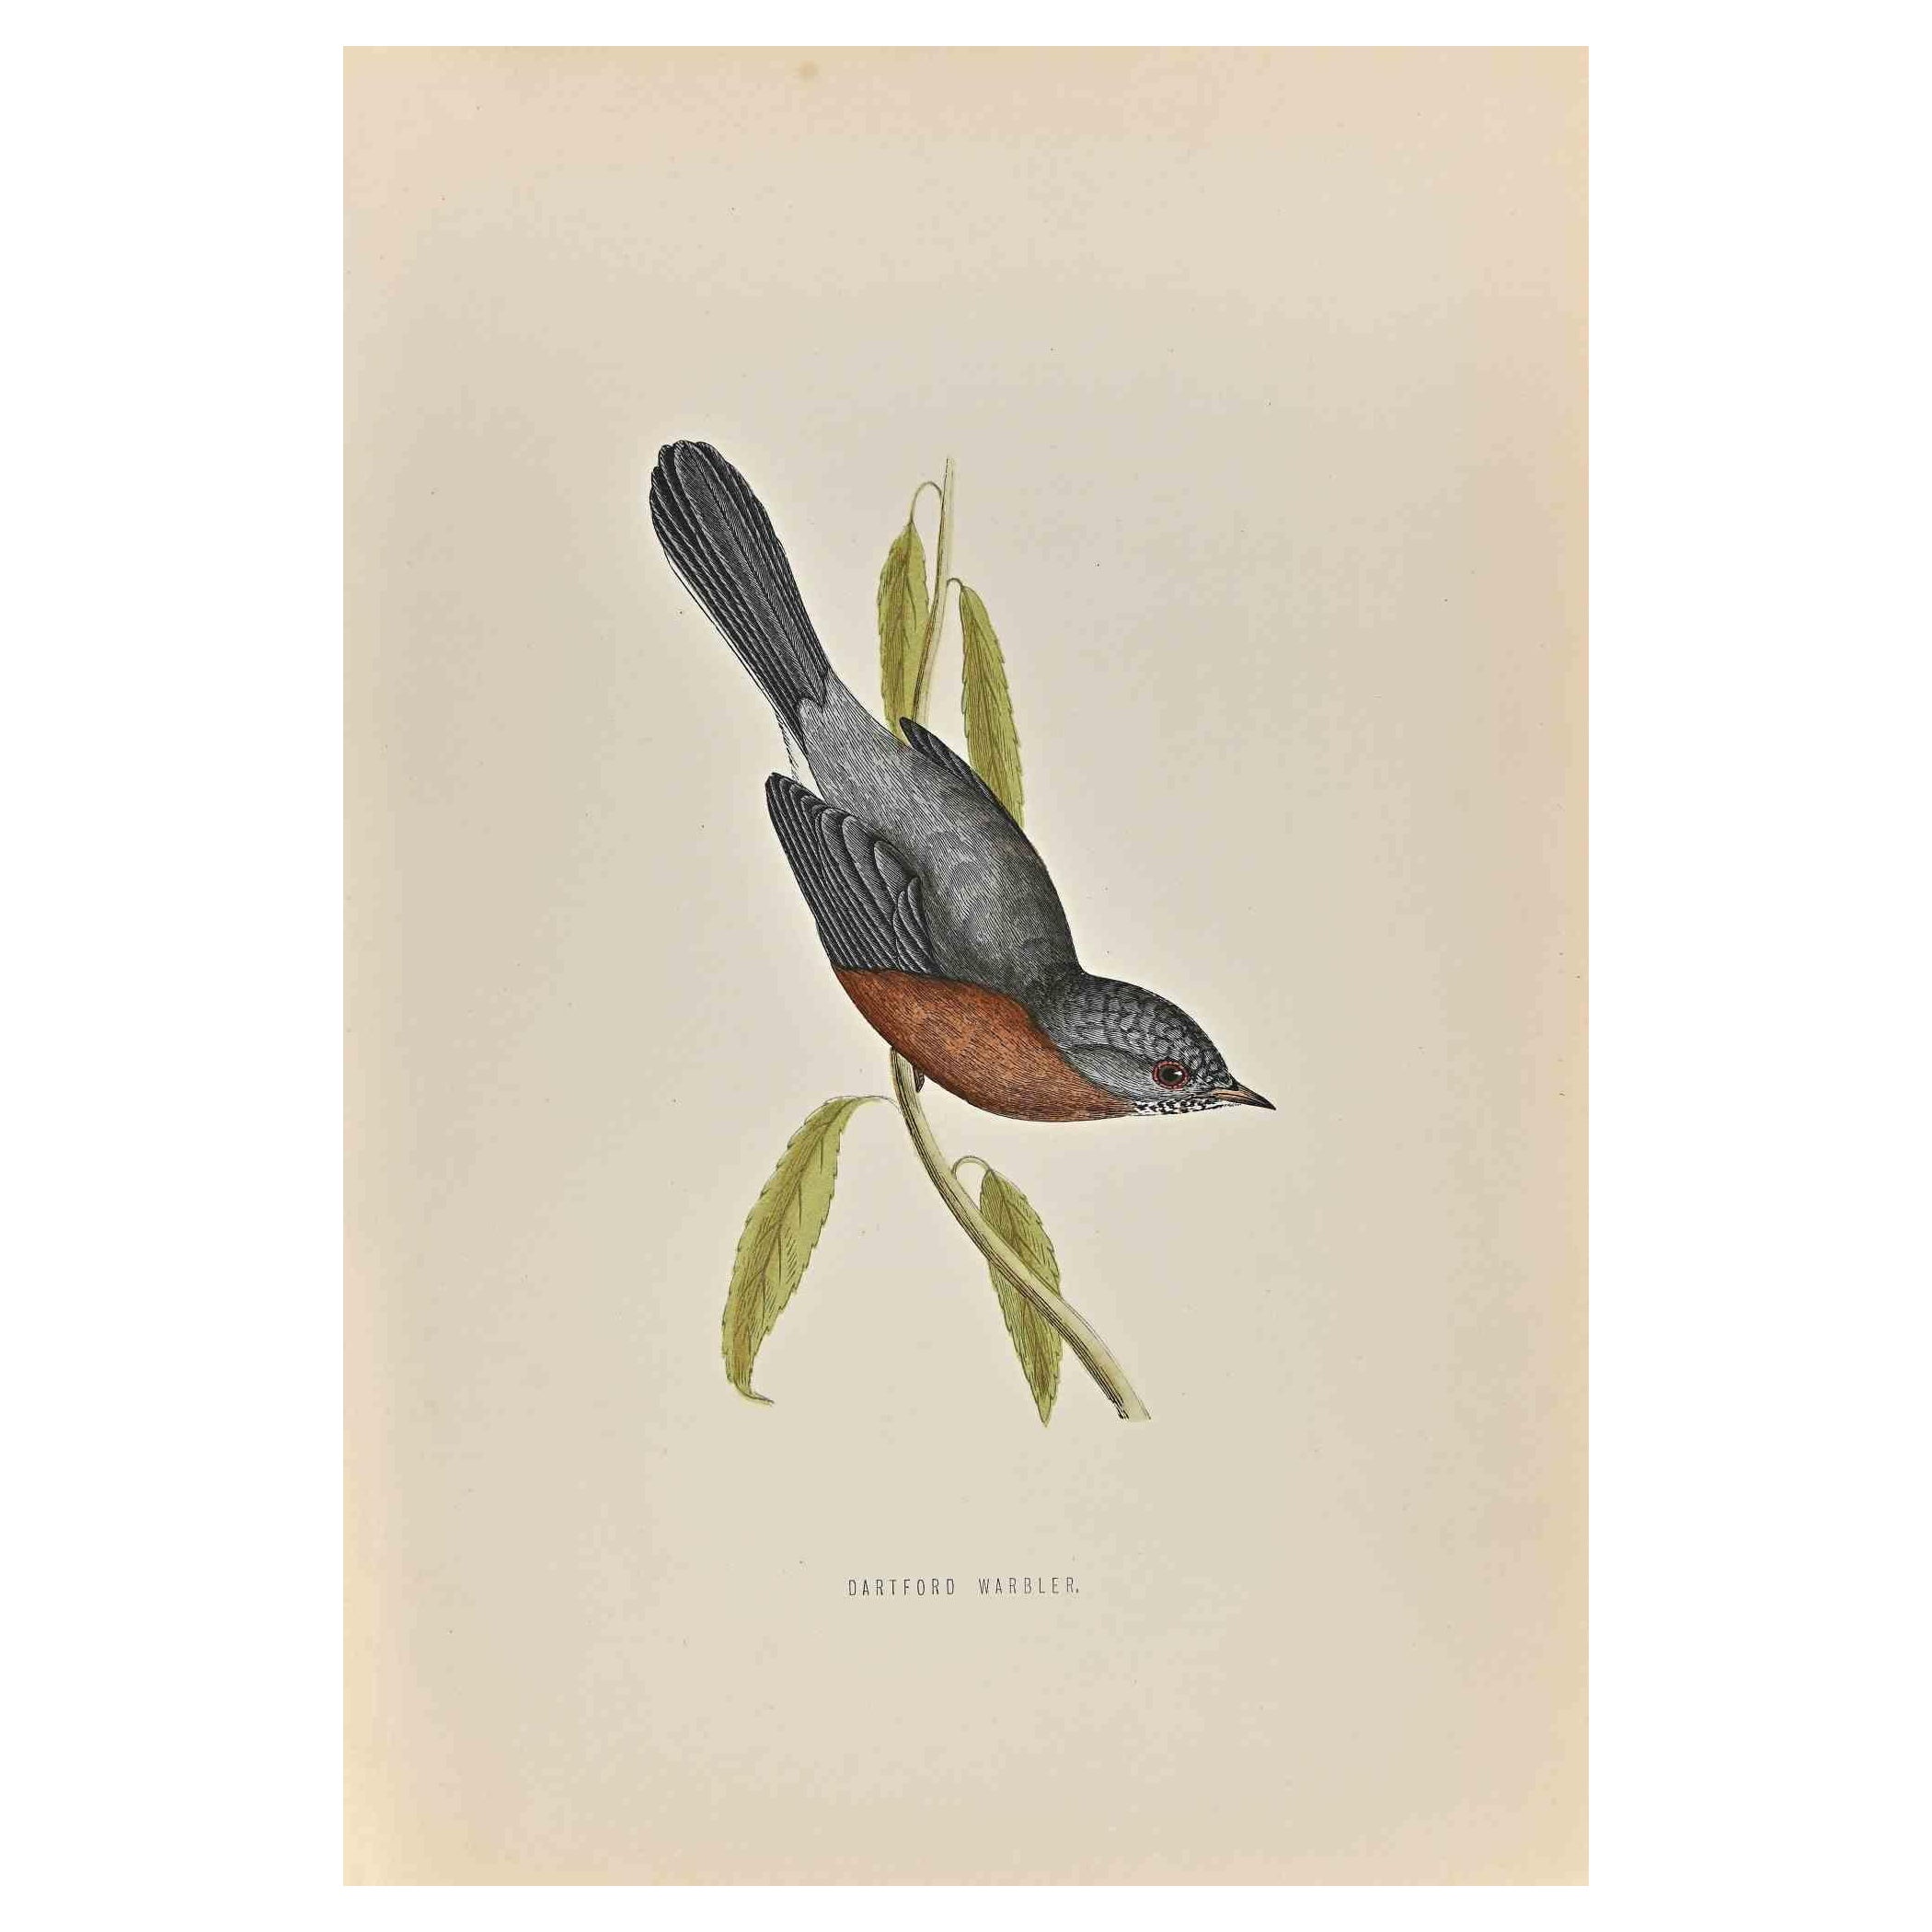 Dartford Warbler is a modern artwork realized in 1870 by the British artist Alexander Francis Lydon (1836-1917) . 

Woodcut print, hand colored, published by London, Bell & Sons, 1870.  Name of the bird printed in plate. This work is part of a print